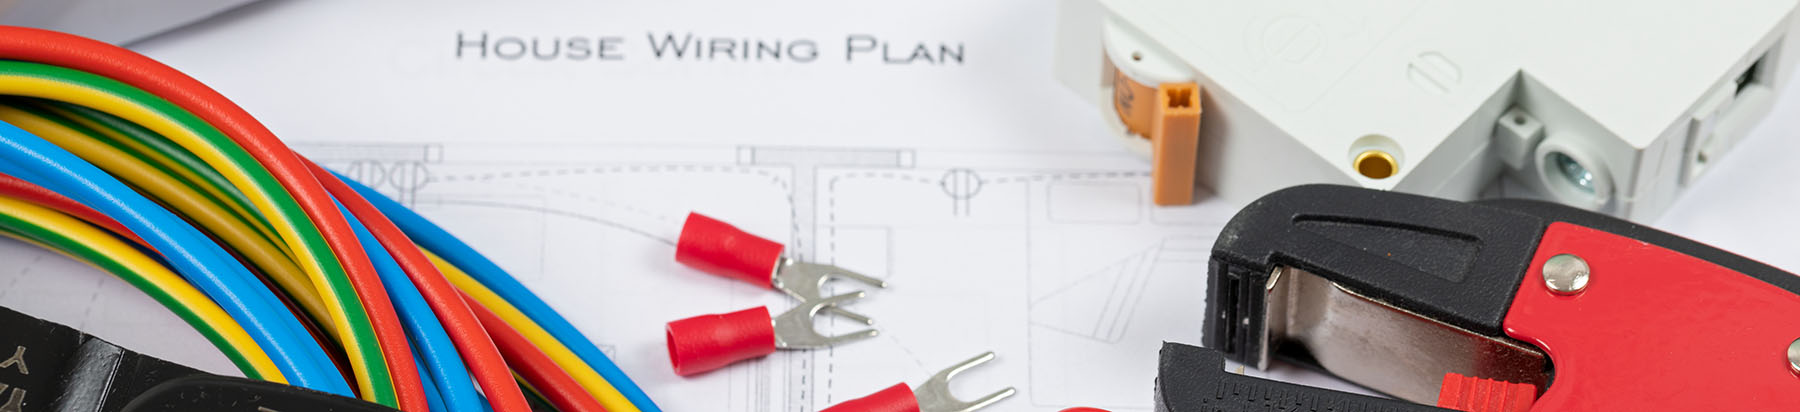 Electrical tools and plan for wiring installation